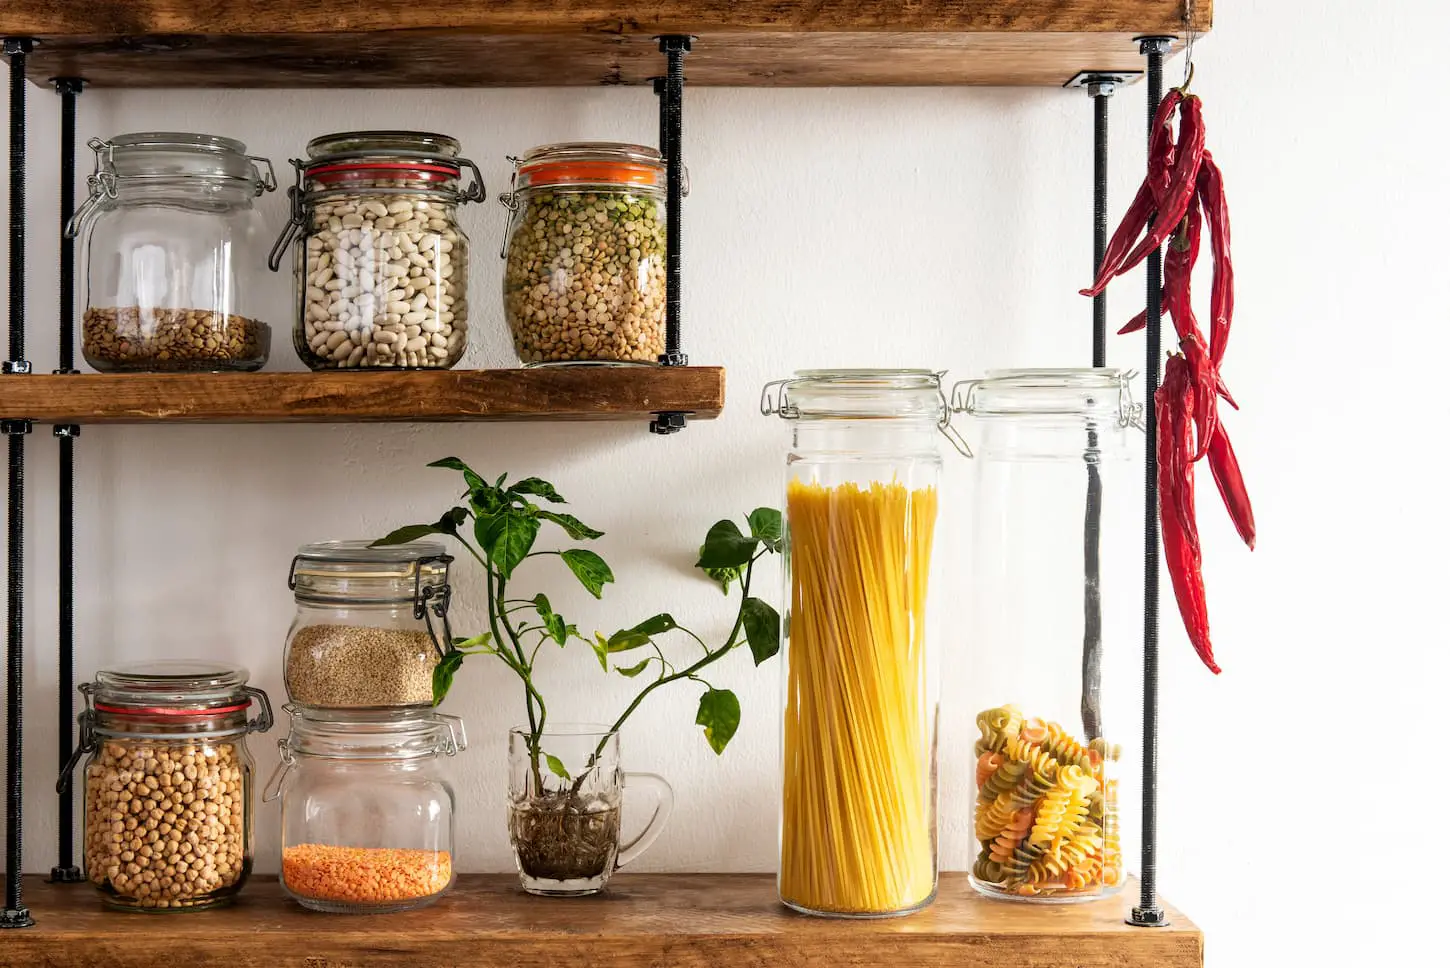 An image of an assortment of dried food in jars on a shelve.